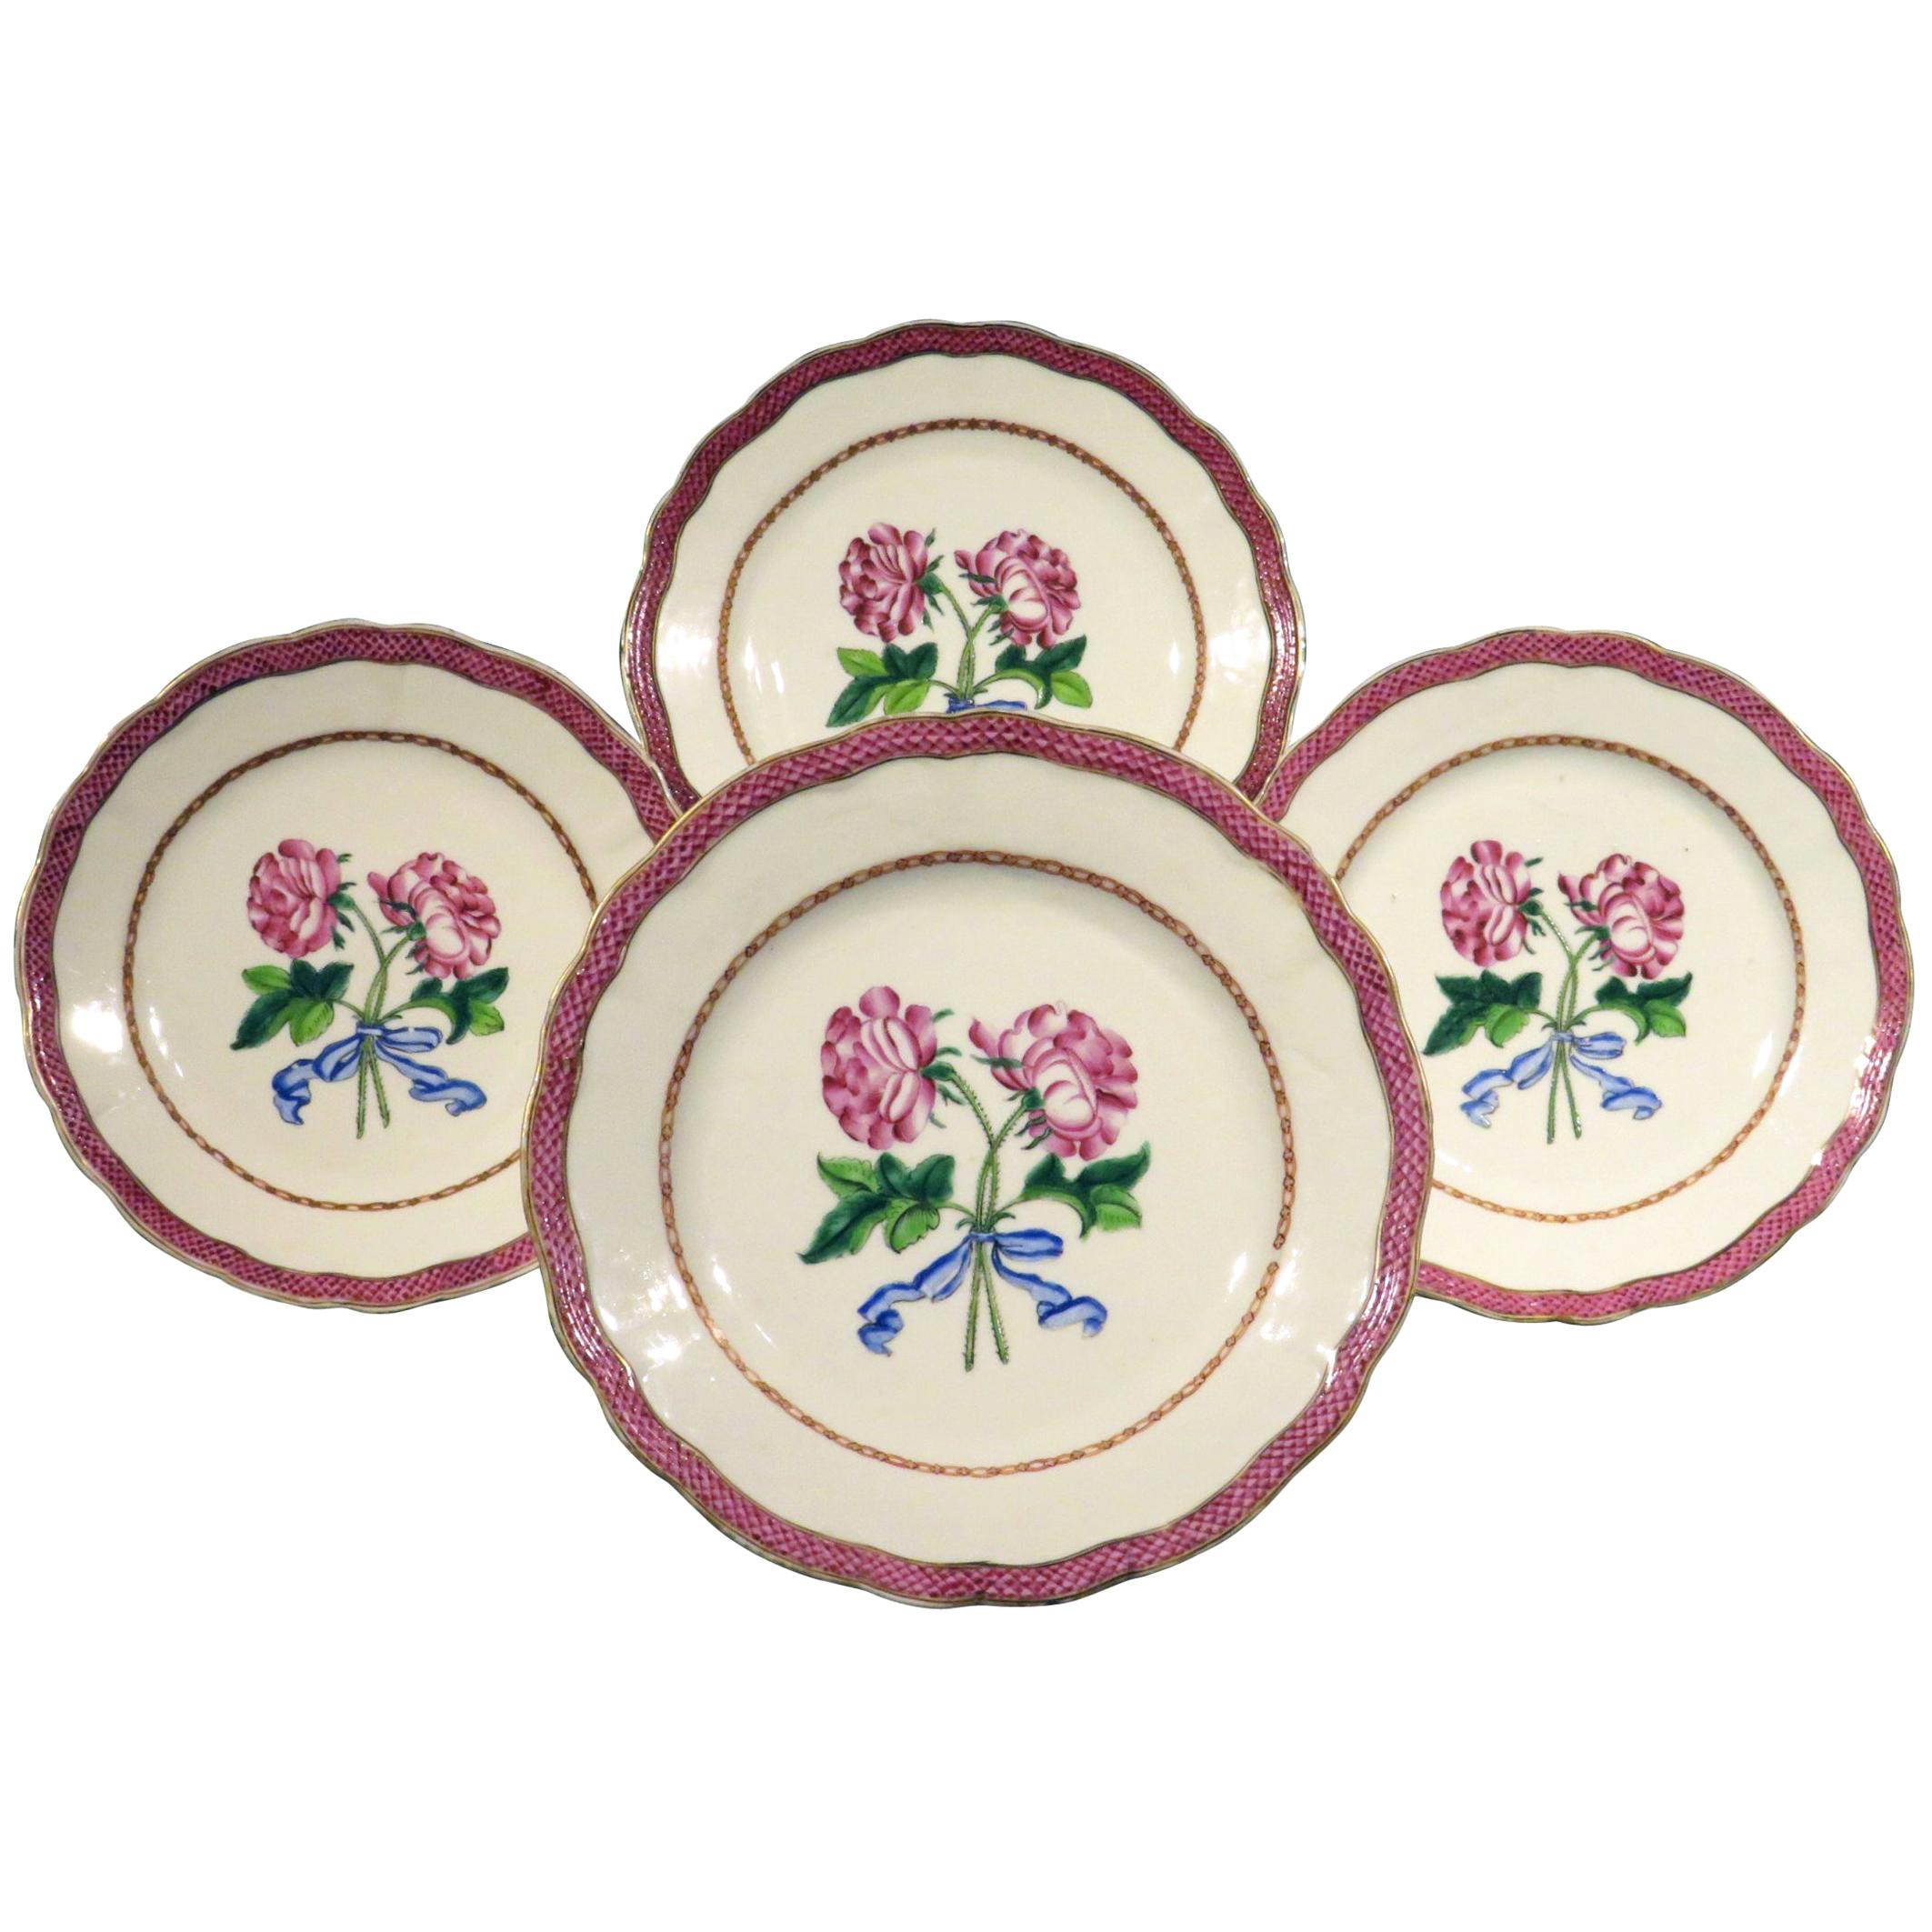 Four Chinese Export Famille Rose Botanical Plates, Qianlong Period, '1736-1795'